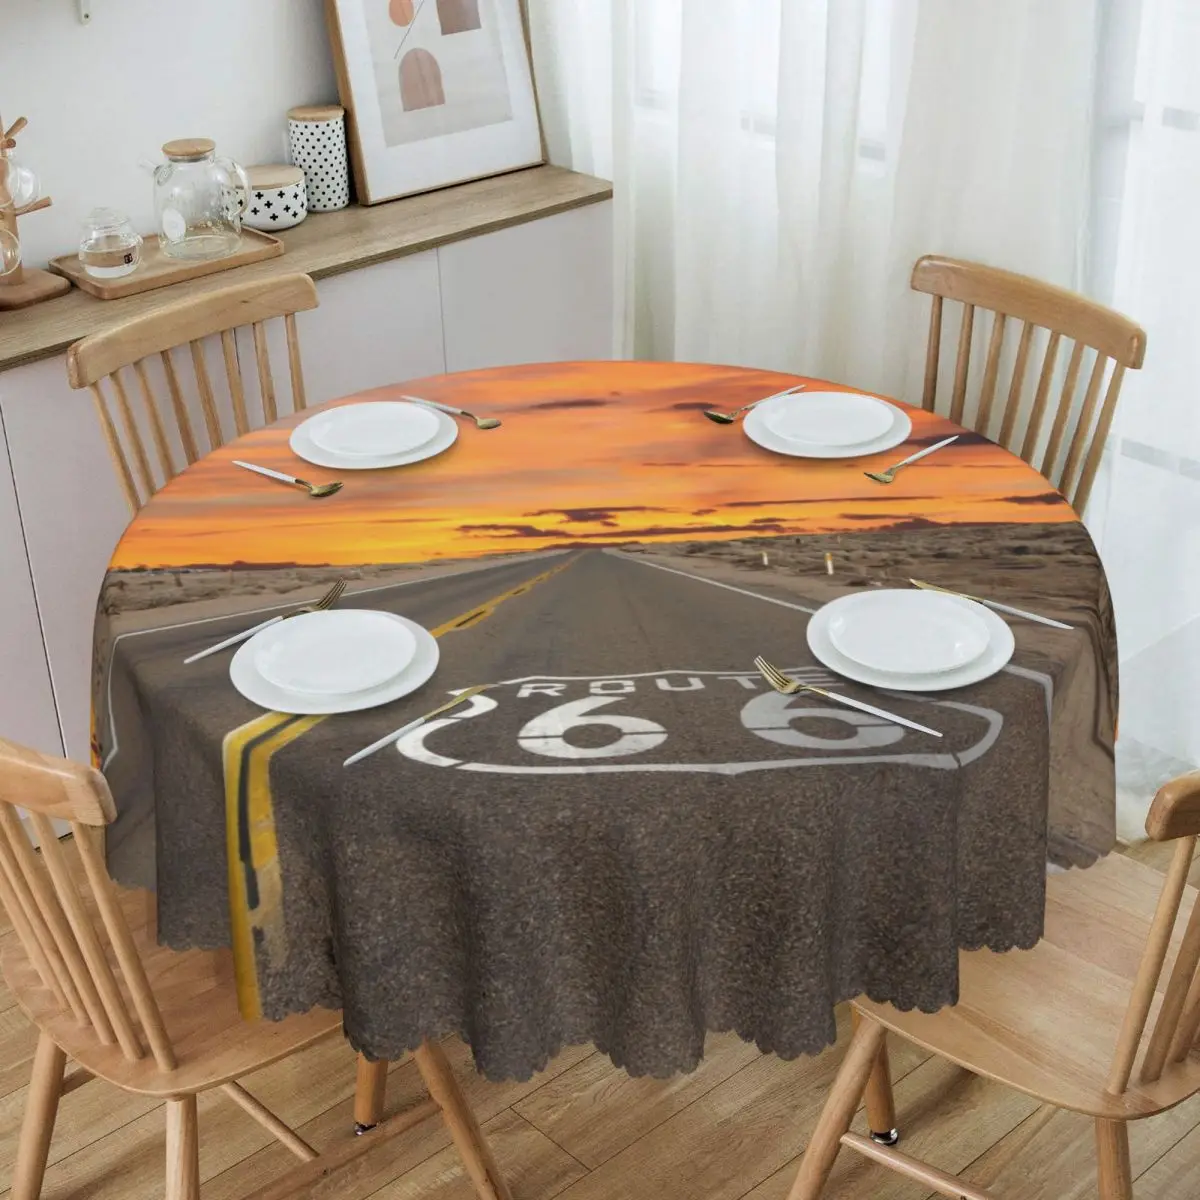 

Round Fitted America Highway Route 66 Table Cloth Waterproof Tablecloth 60 inch Table Cover for Kitchen Dinning